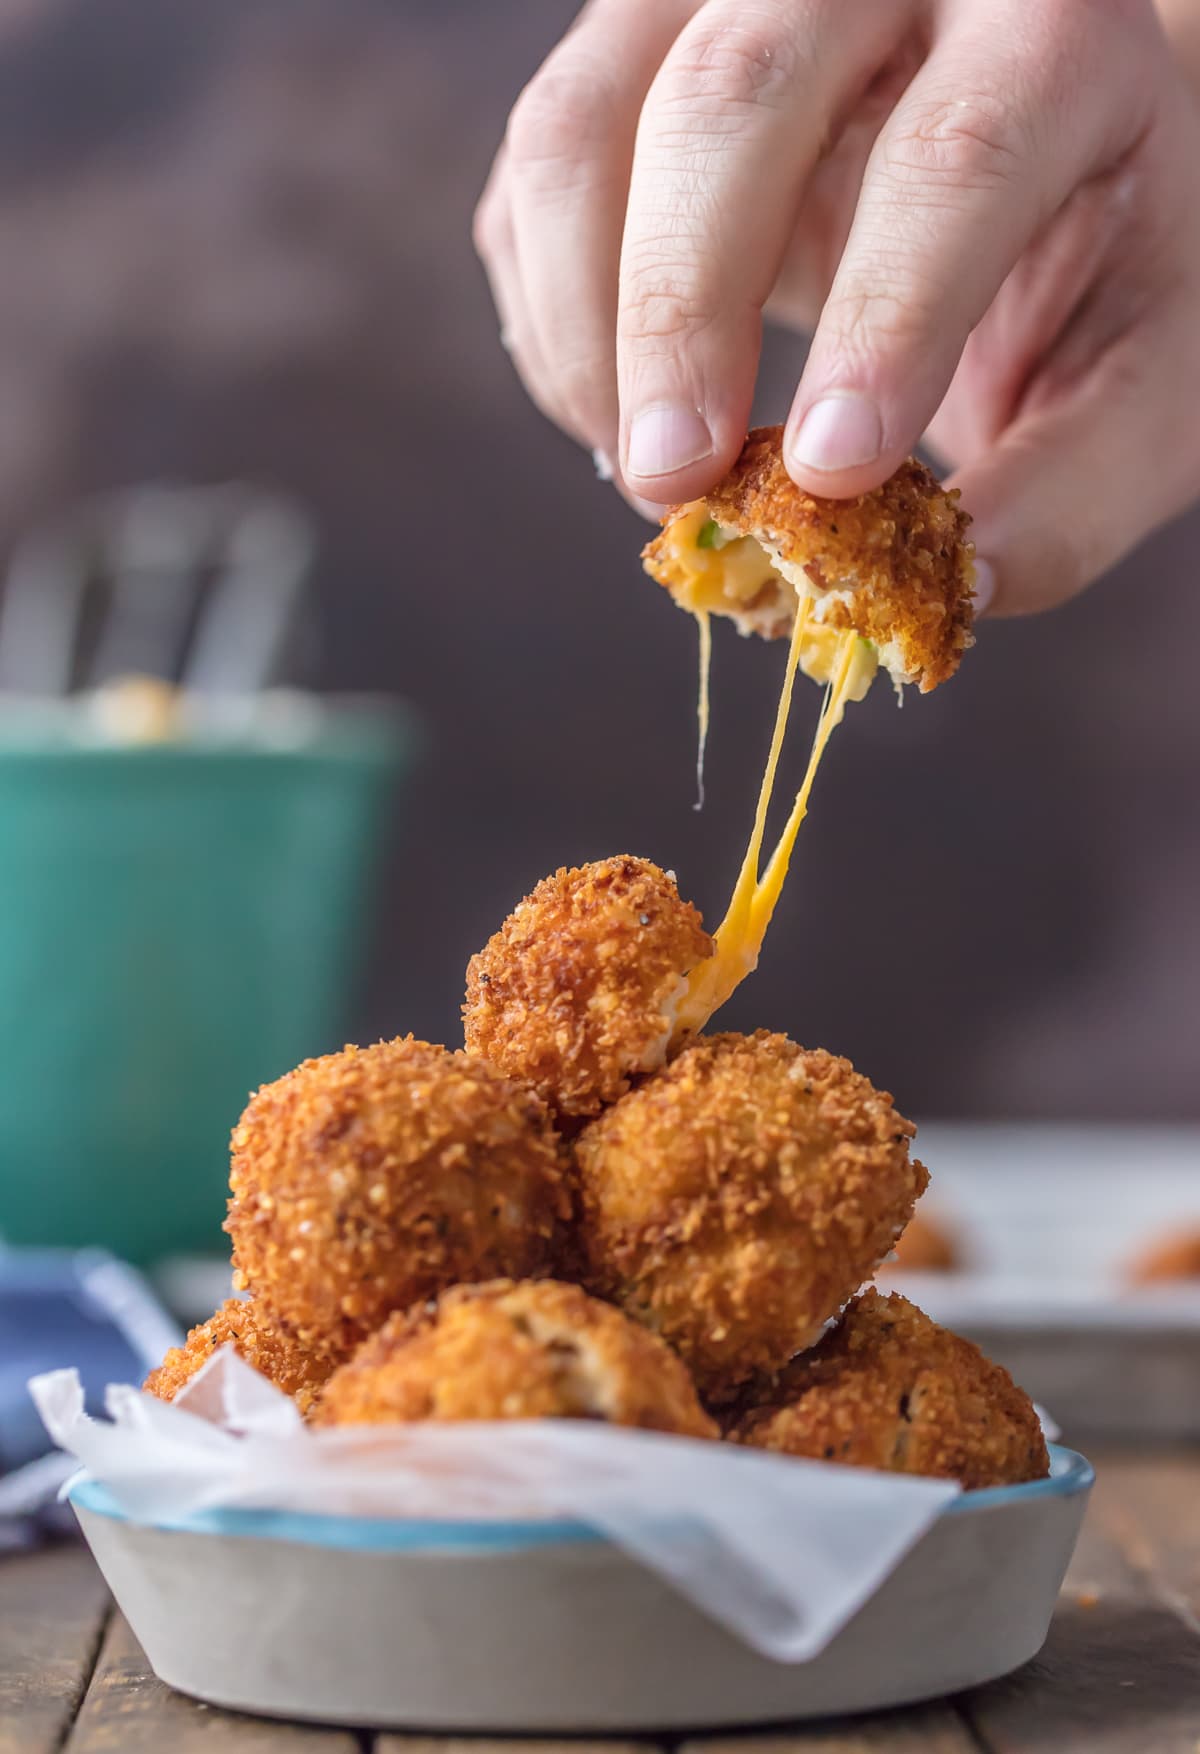 DEEP FRIED LOADED MASHED POTATO BITES loaded with bacon, cheese, and onions are perfect for Thanksgiving leftovers! Put those leftover mashed potatoes to good use and fry them! The ultimate appetizer or side dish!